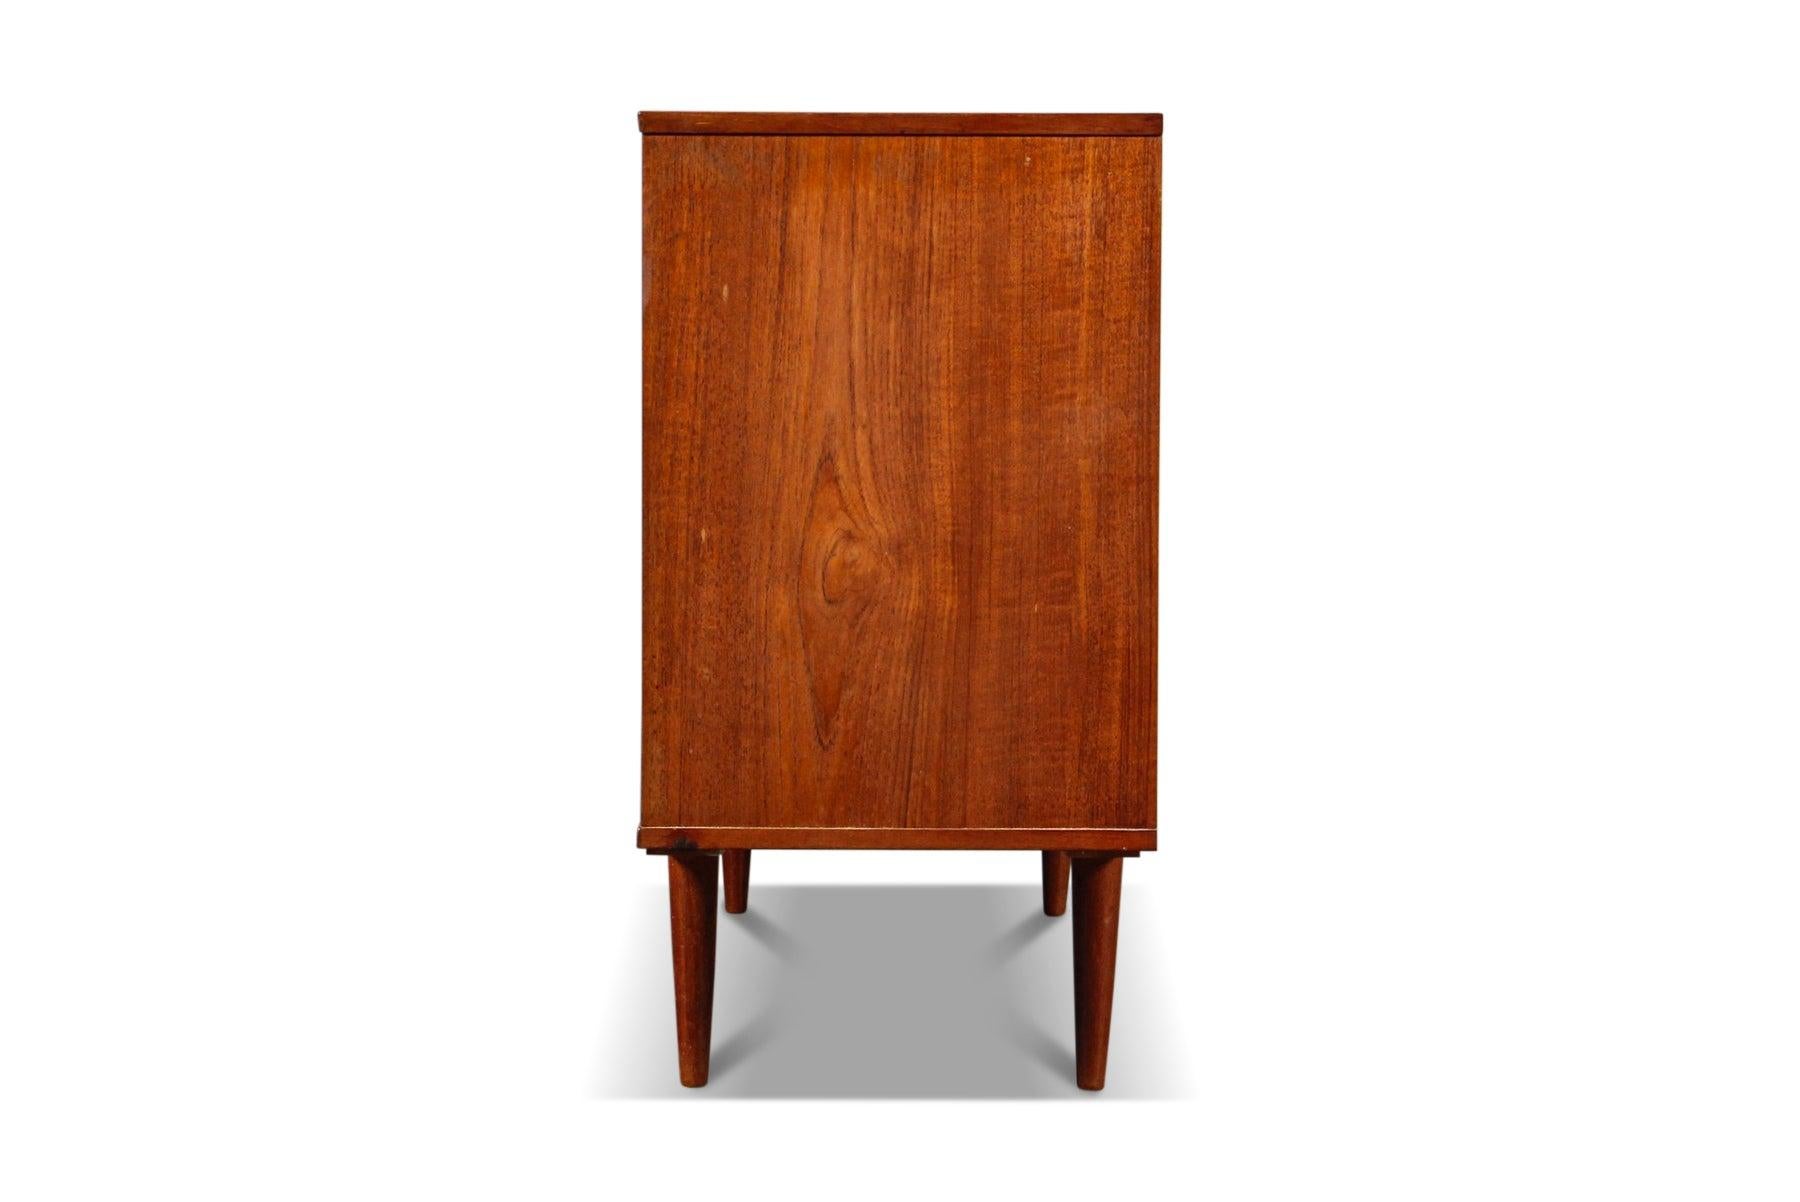 Origin: Denmark
Designer: Unknown
Manufacturer: Unknown
Era: 1960s
Materials: Teak
Measurements: 59? wide x 16? deep x 31.5? tall

Condition: In excellent original condition with some cosmetic wear. Will be addressed in refinishing – Included